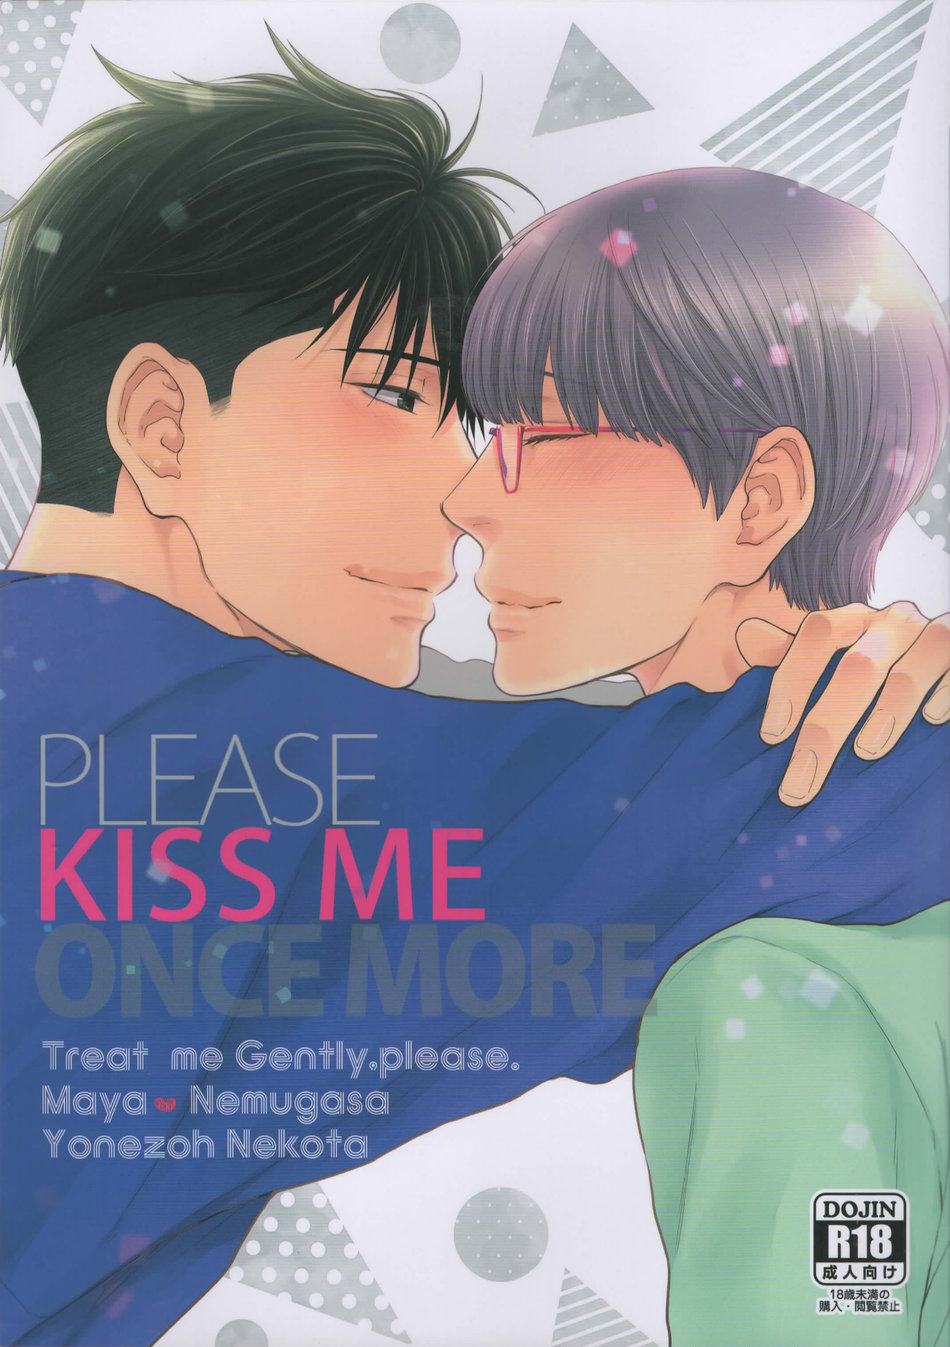 Please kiss me once more - Foto 1